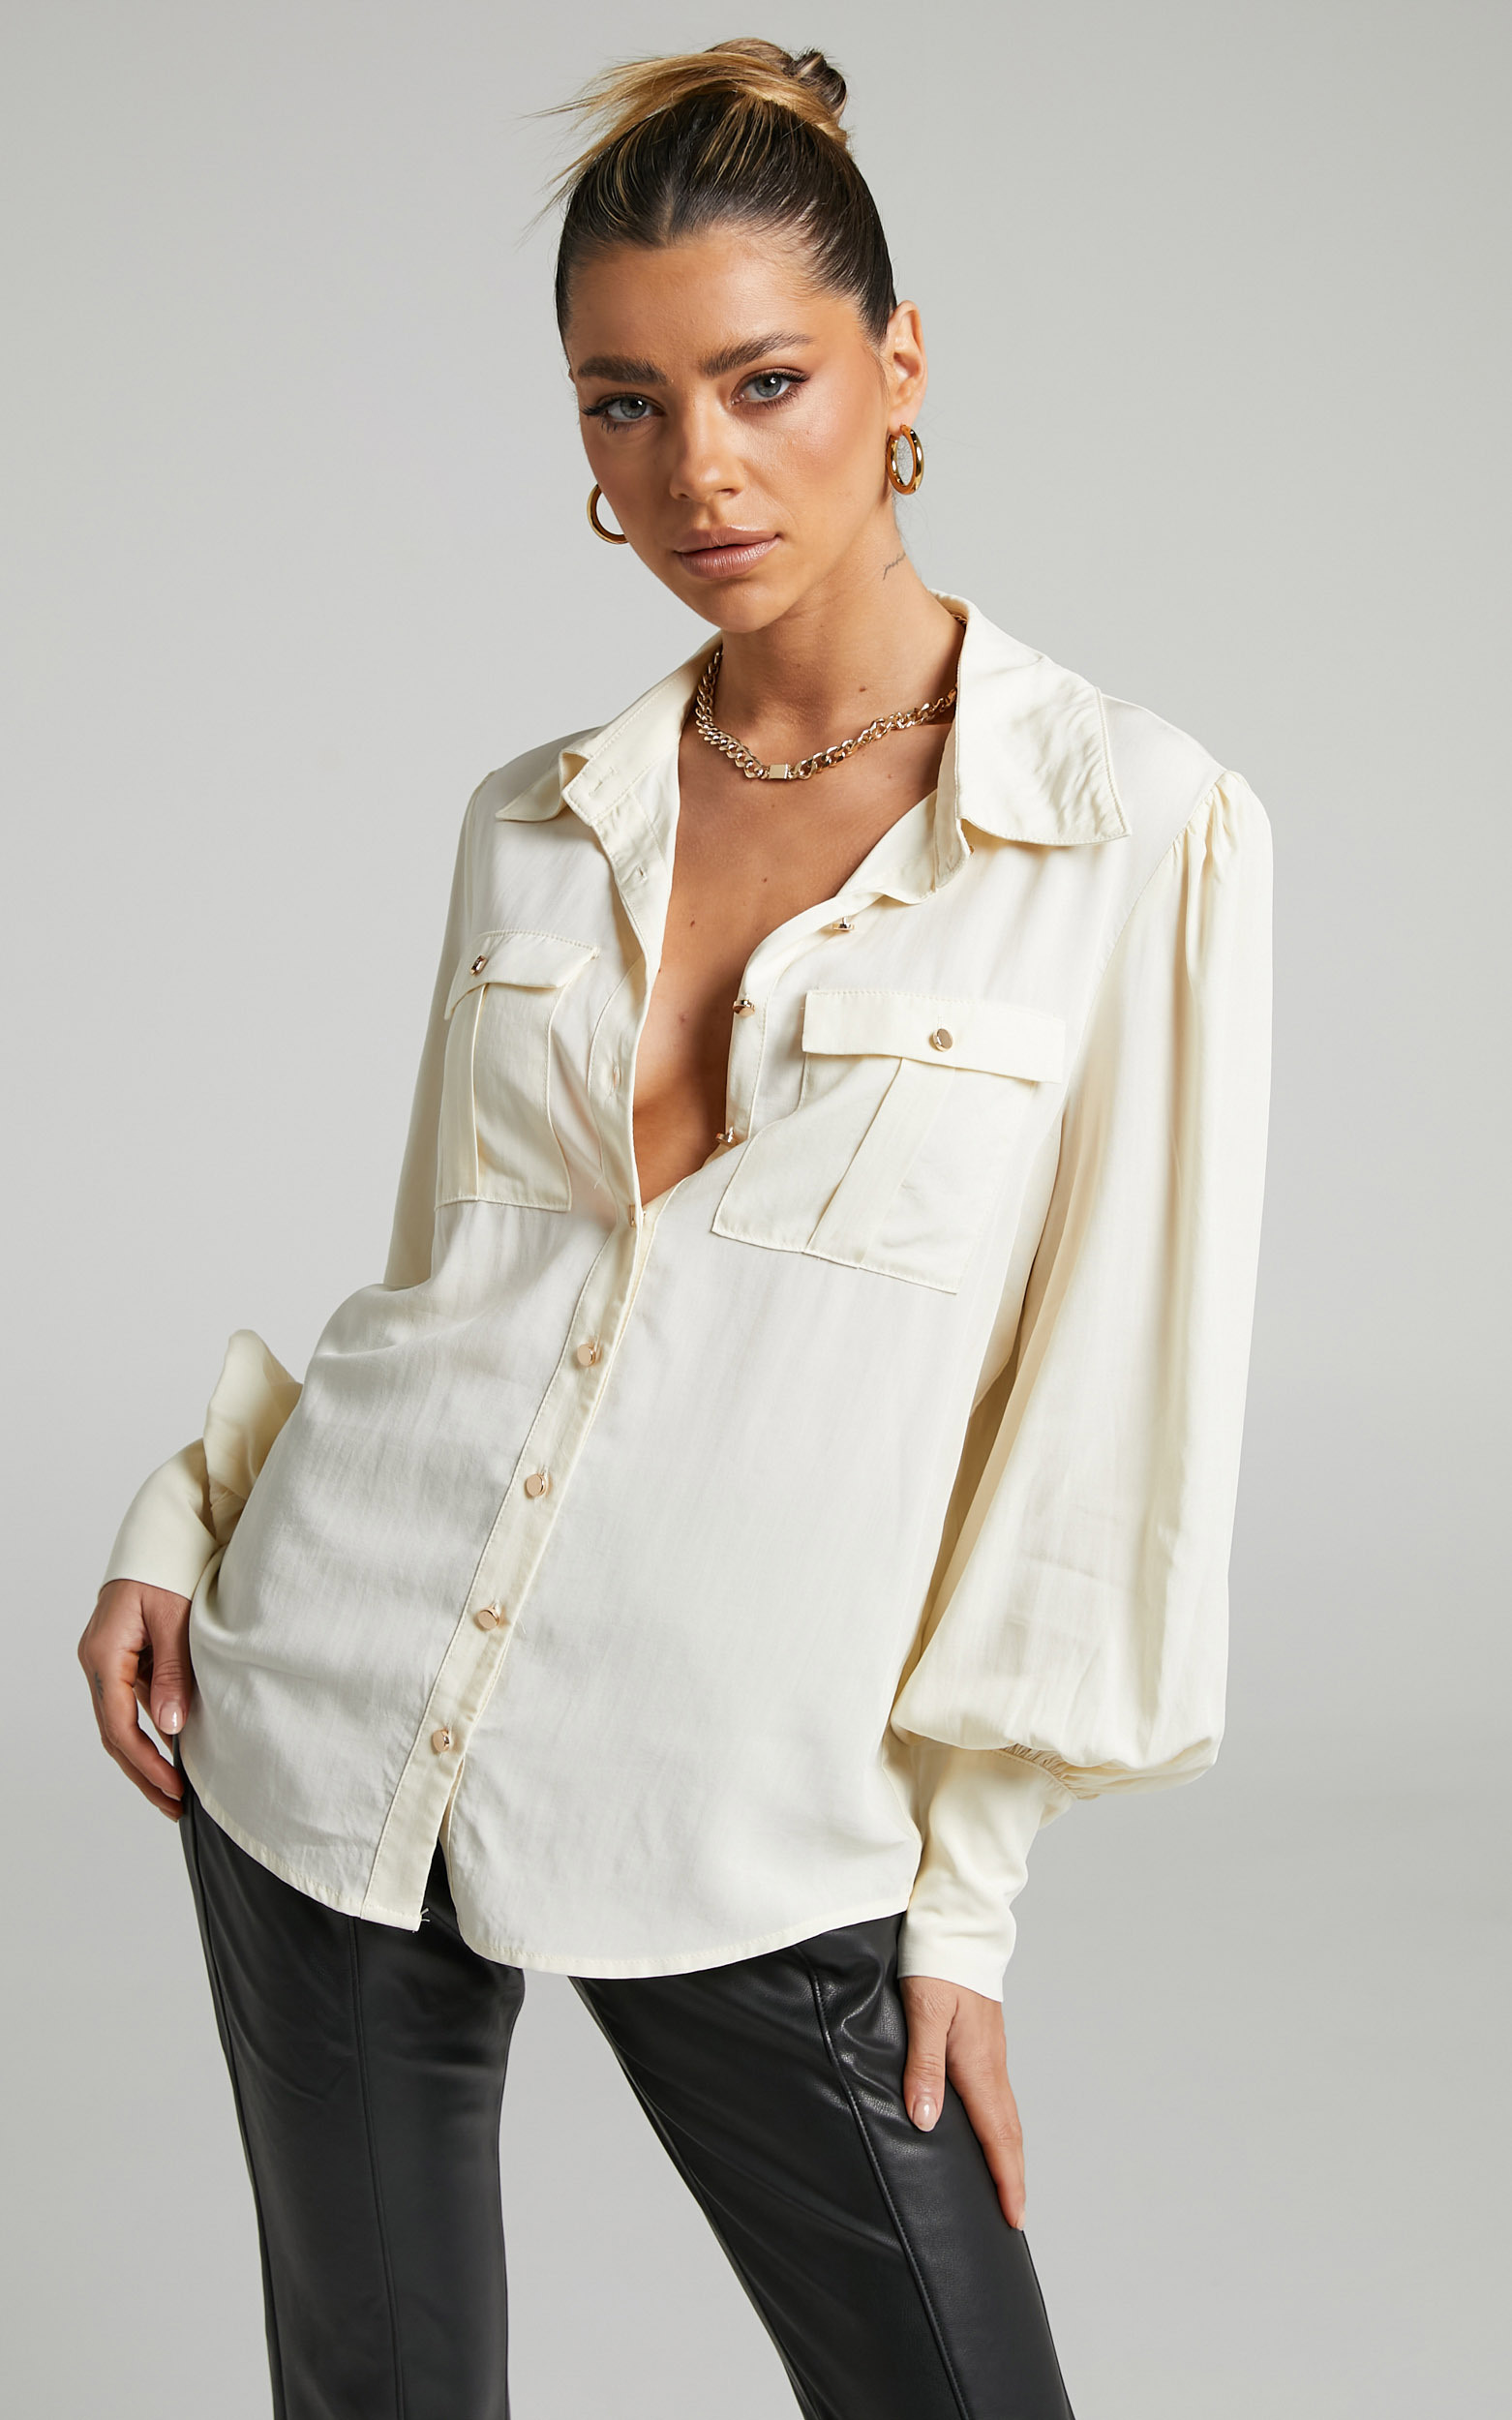 Aingeal Long Sleeve Button Up Shirt in Ivory - 04, WHT1, hi-res image number null